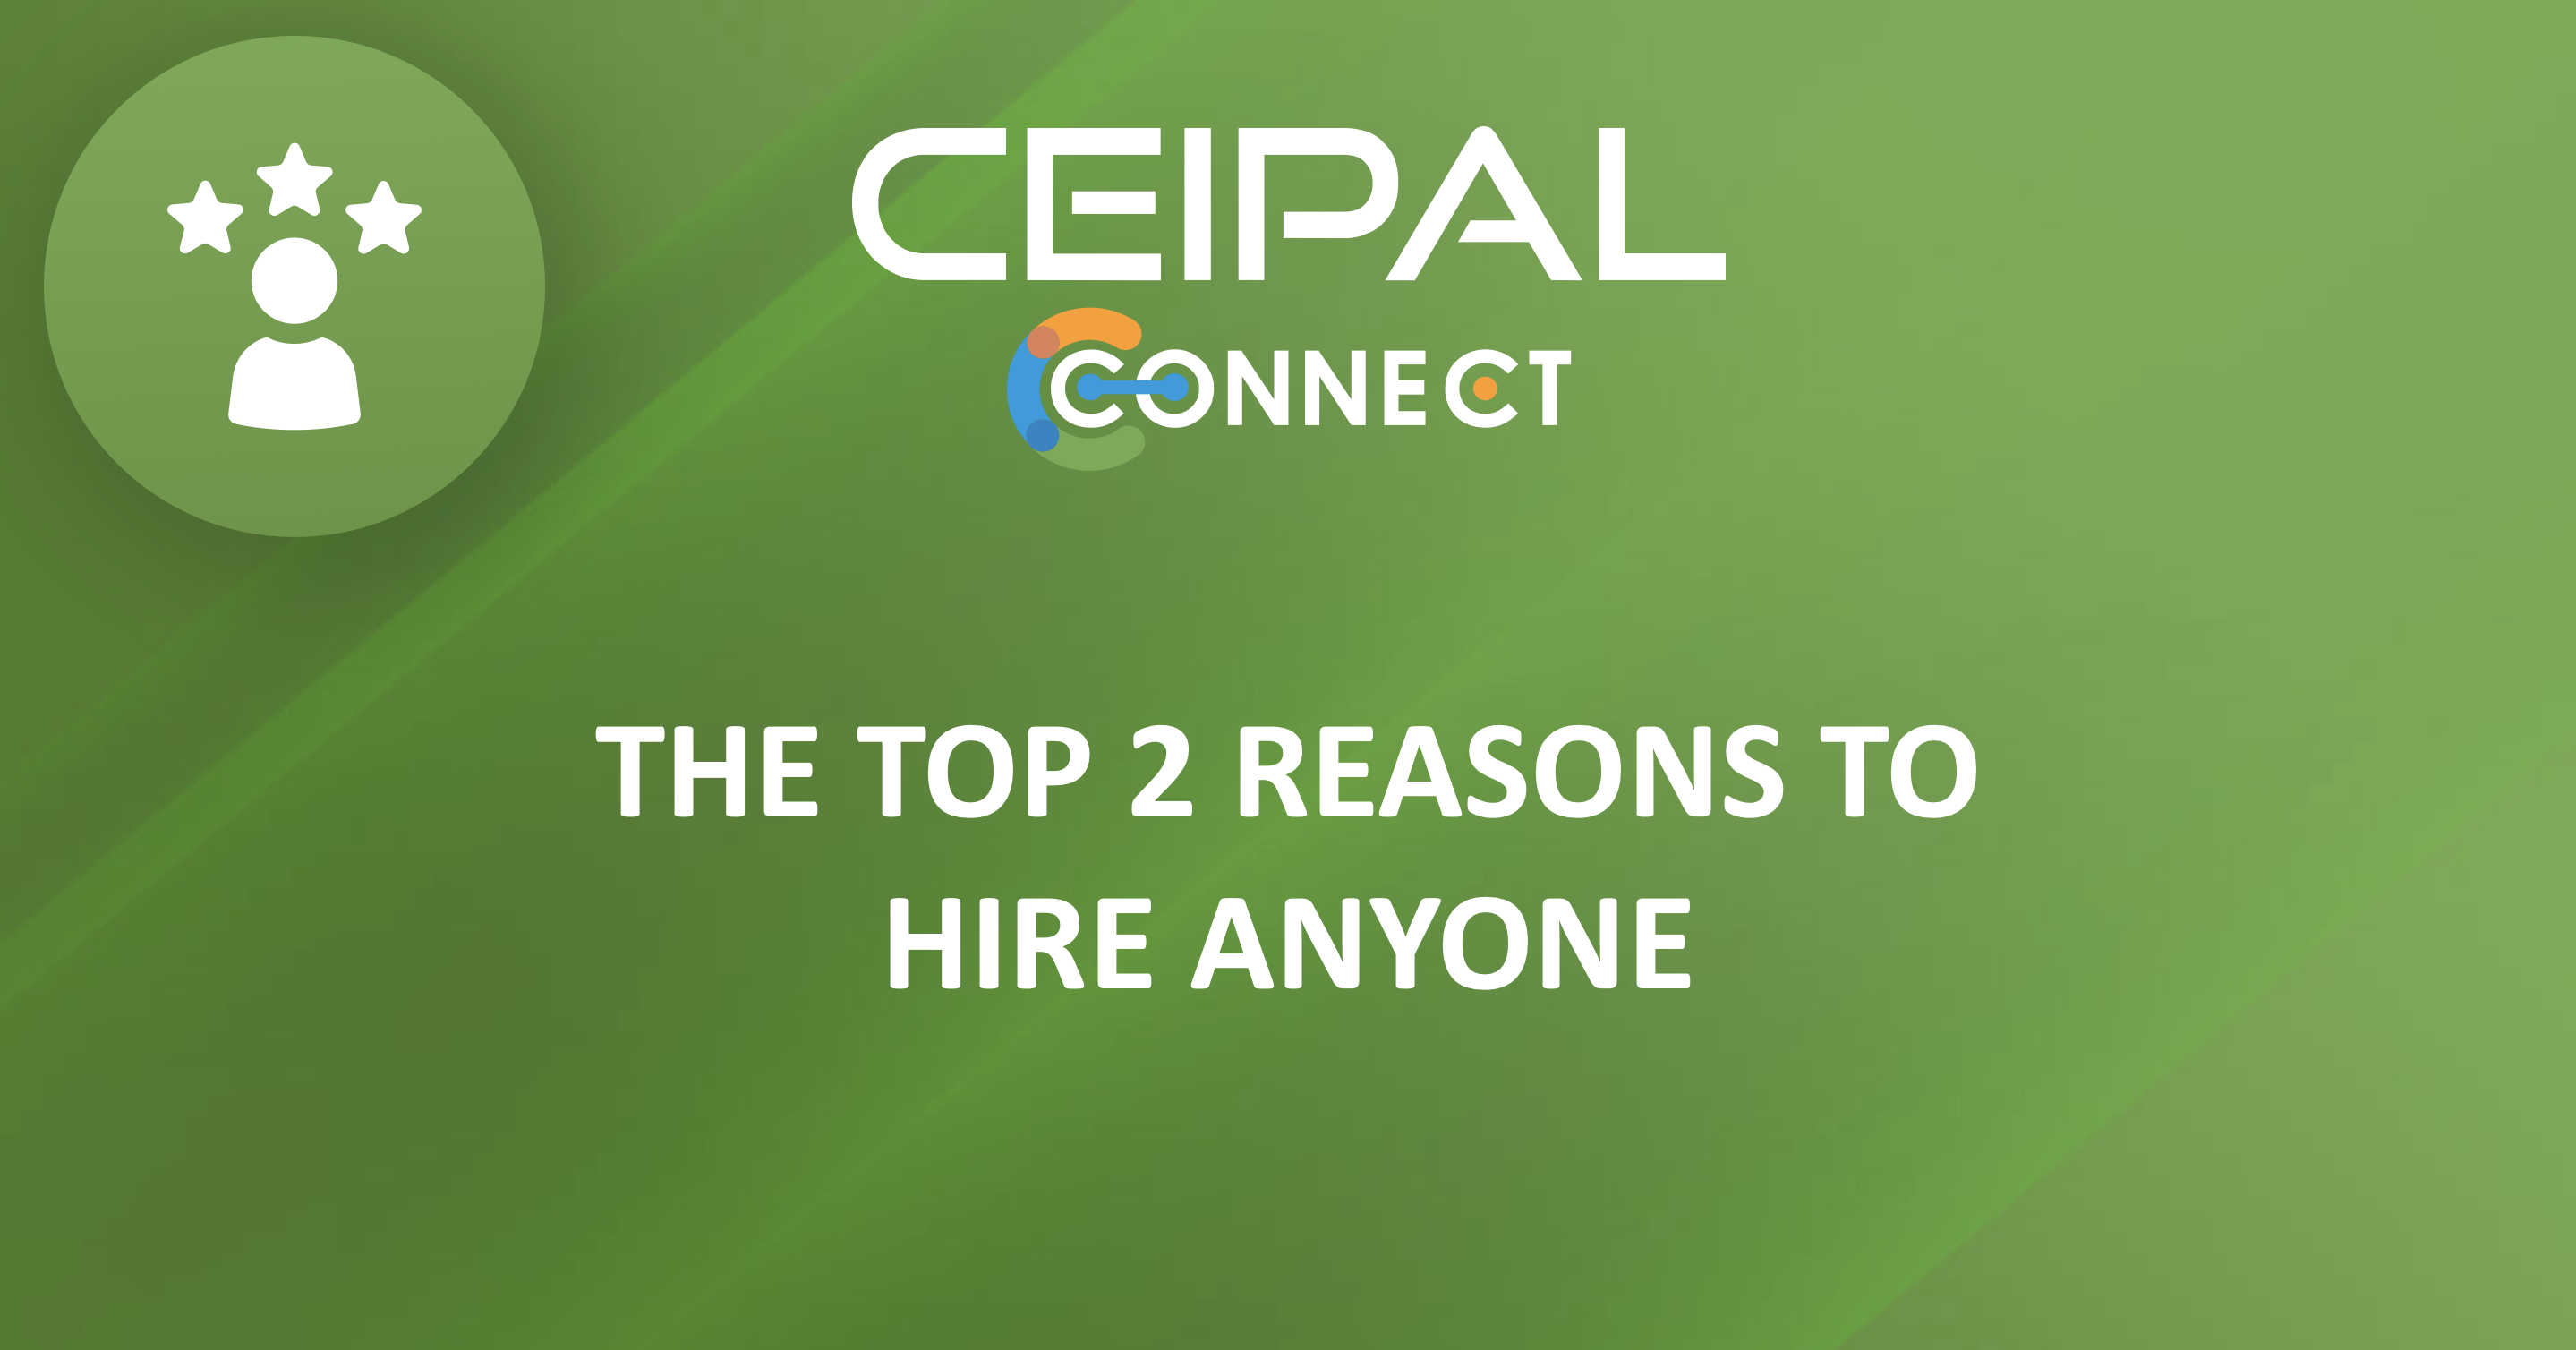 The Top 2 Reasons to Hire Anyone